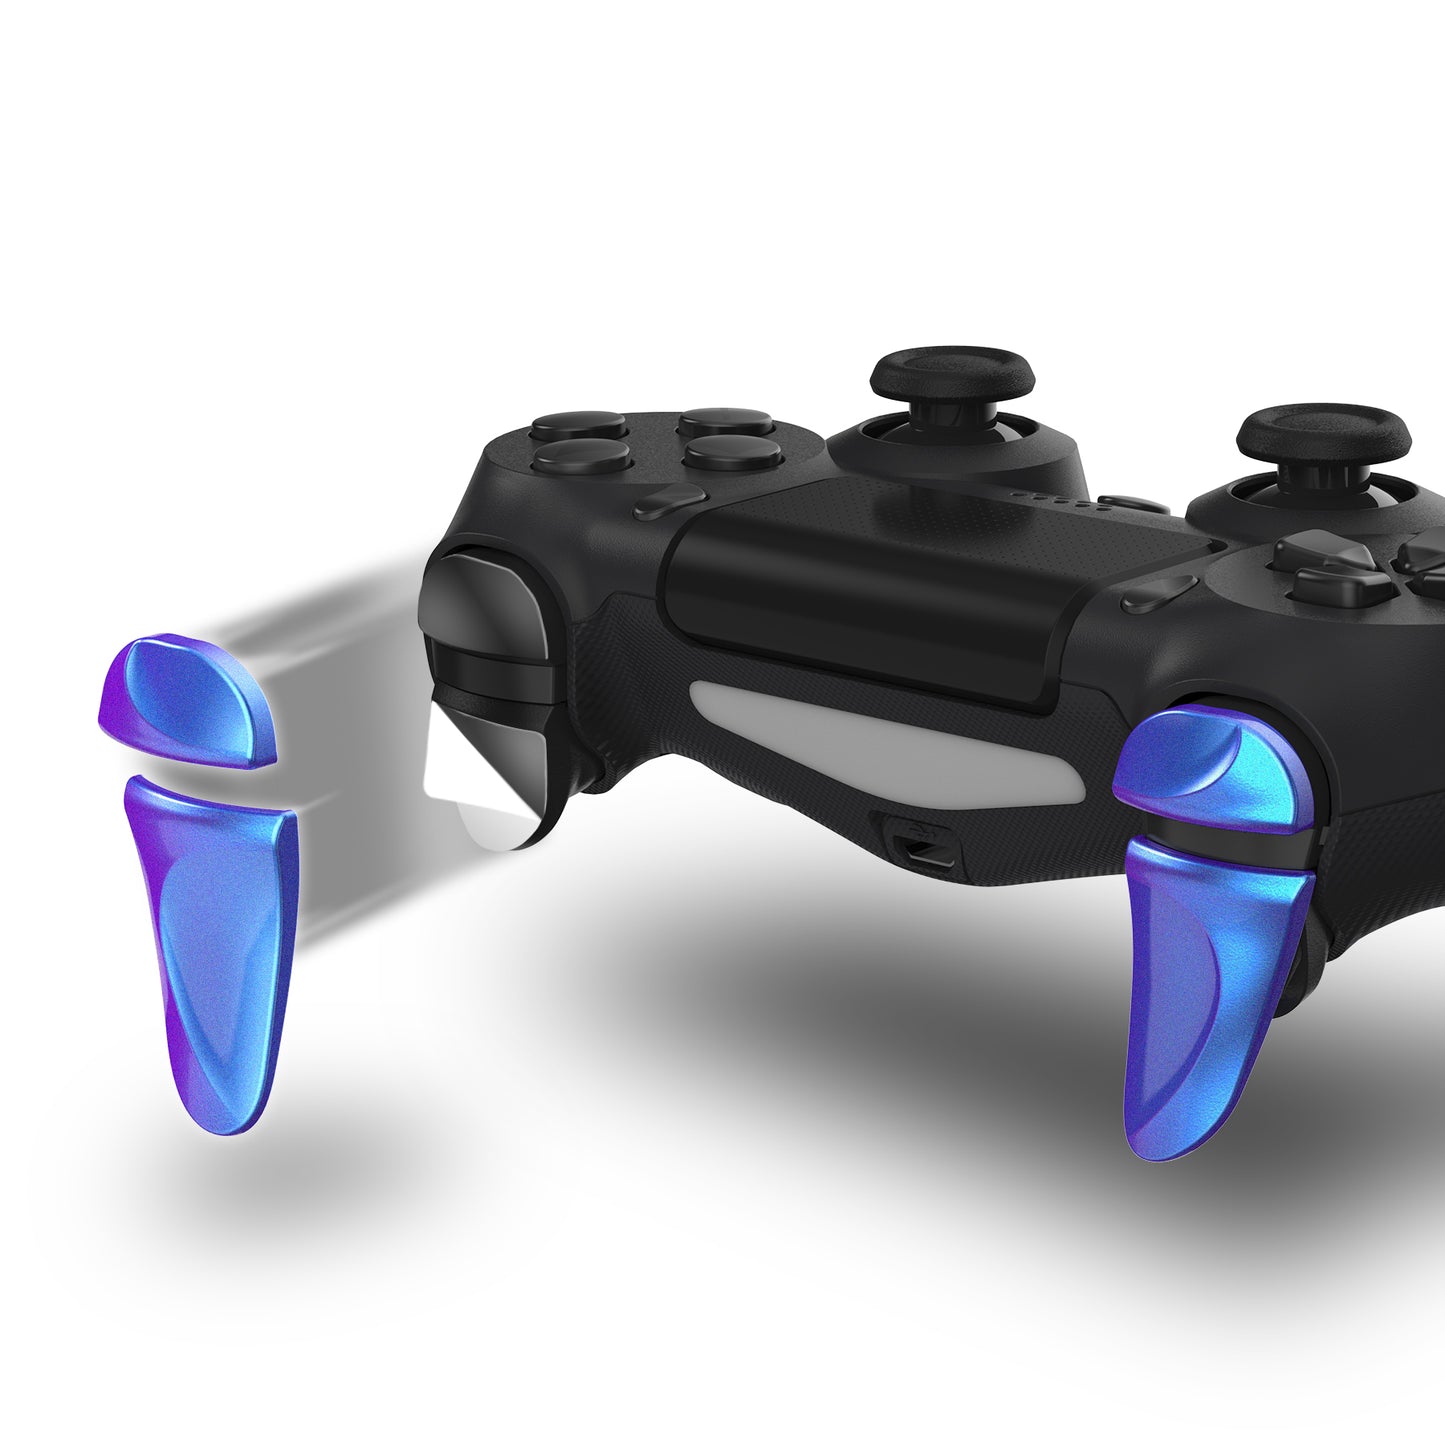 PlayVital 2 Pair Shoulder Buttons Extension Triggers for PS4 All Model Controller, Game Improvement Adjusters for PS4 Controller, Bumper Trigger Extenders for PS4 Slim Pro Controller - Chameleon Purple Blue - P4PJ003 PlayVital